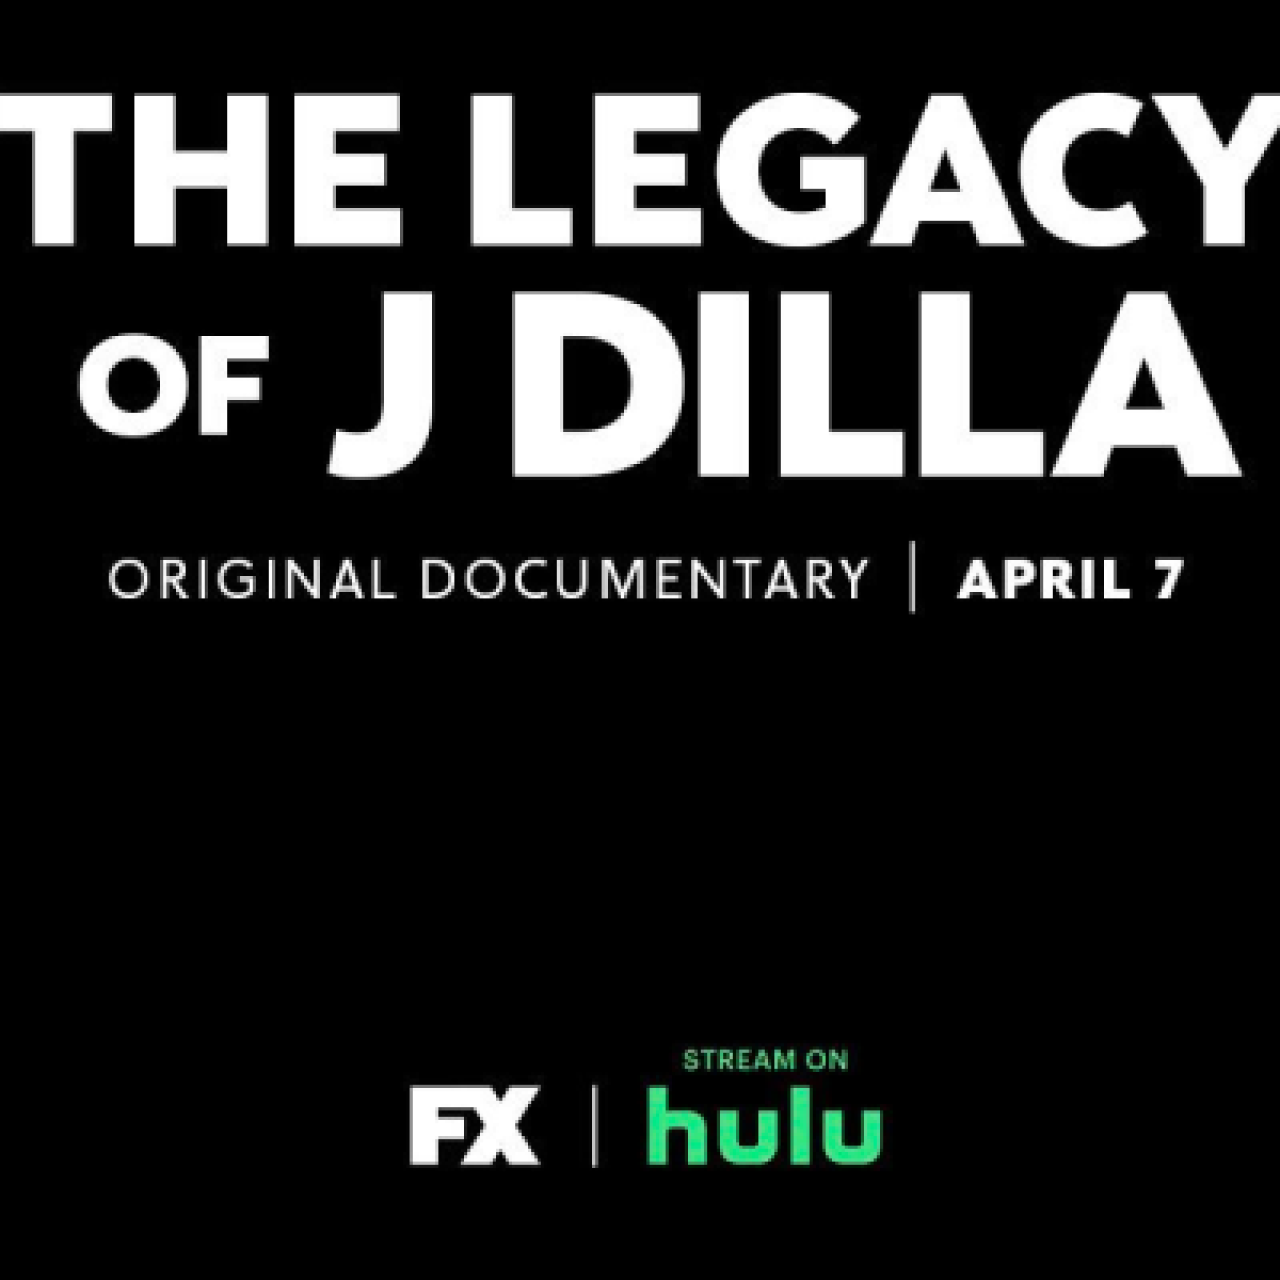 The Legacy of J Dilla